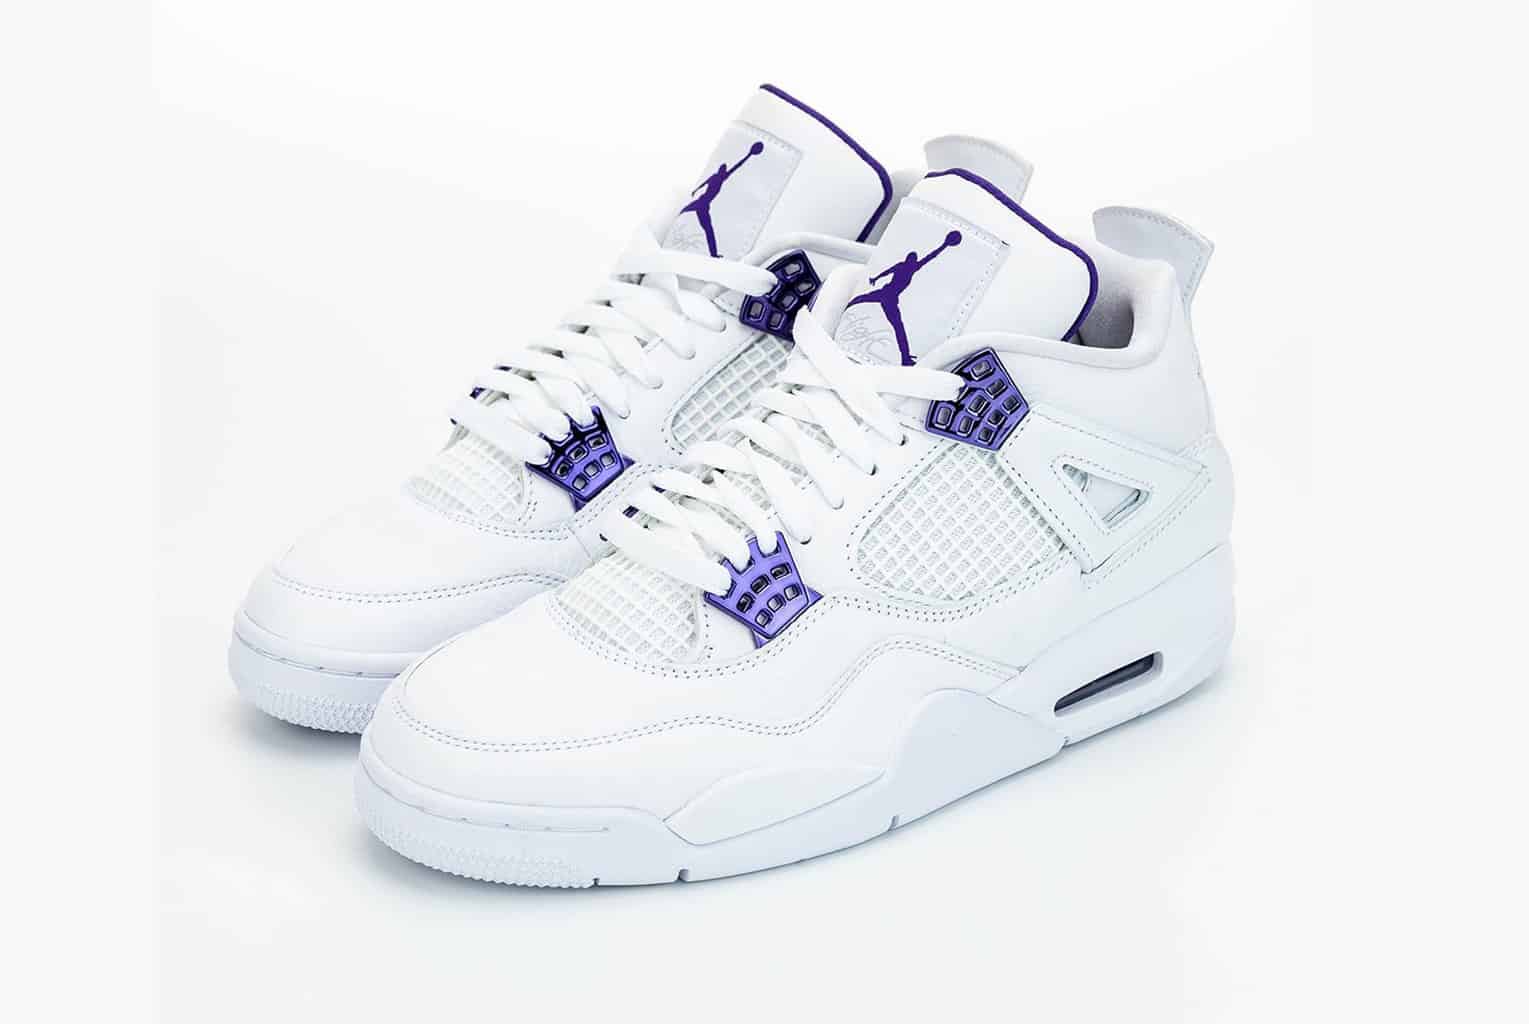 The Air Jordan 4 quot Court Purple quot Arrives Just In Time For Summer